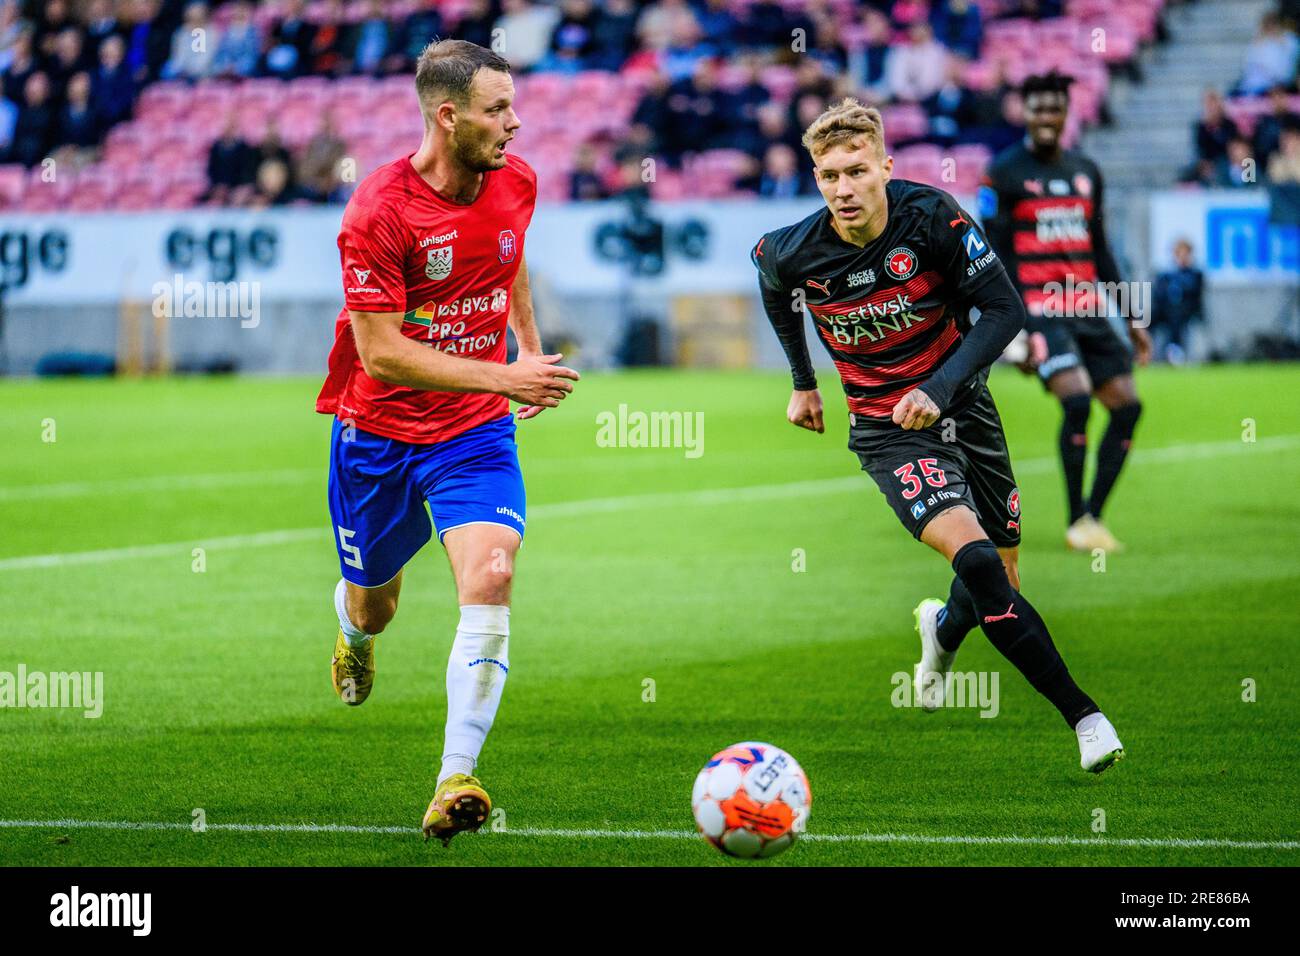 Herning, Denmark. 21st, July 2023. Matti Olsen (5) of Hvidovre IF and Charles (35) of FC Midtjylland seen during the 3F Superliga match between FC Midtjylland and Hvidovre IF at MCH Arena in Herning. Stock Photo